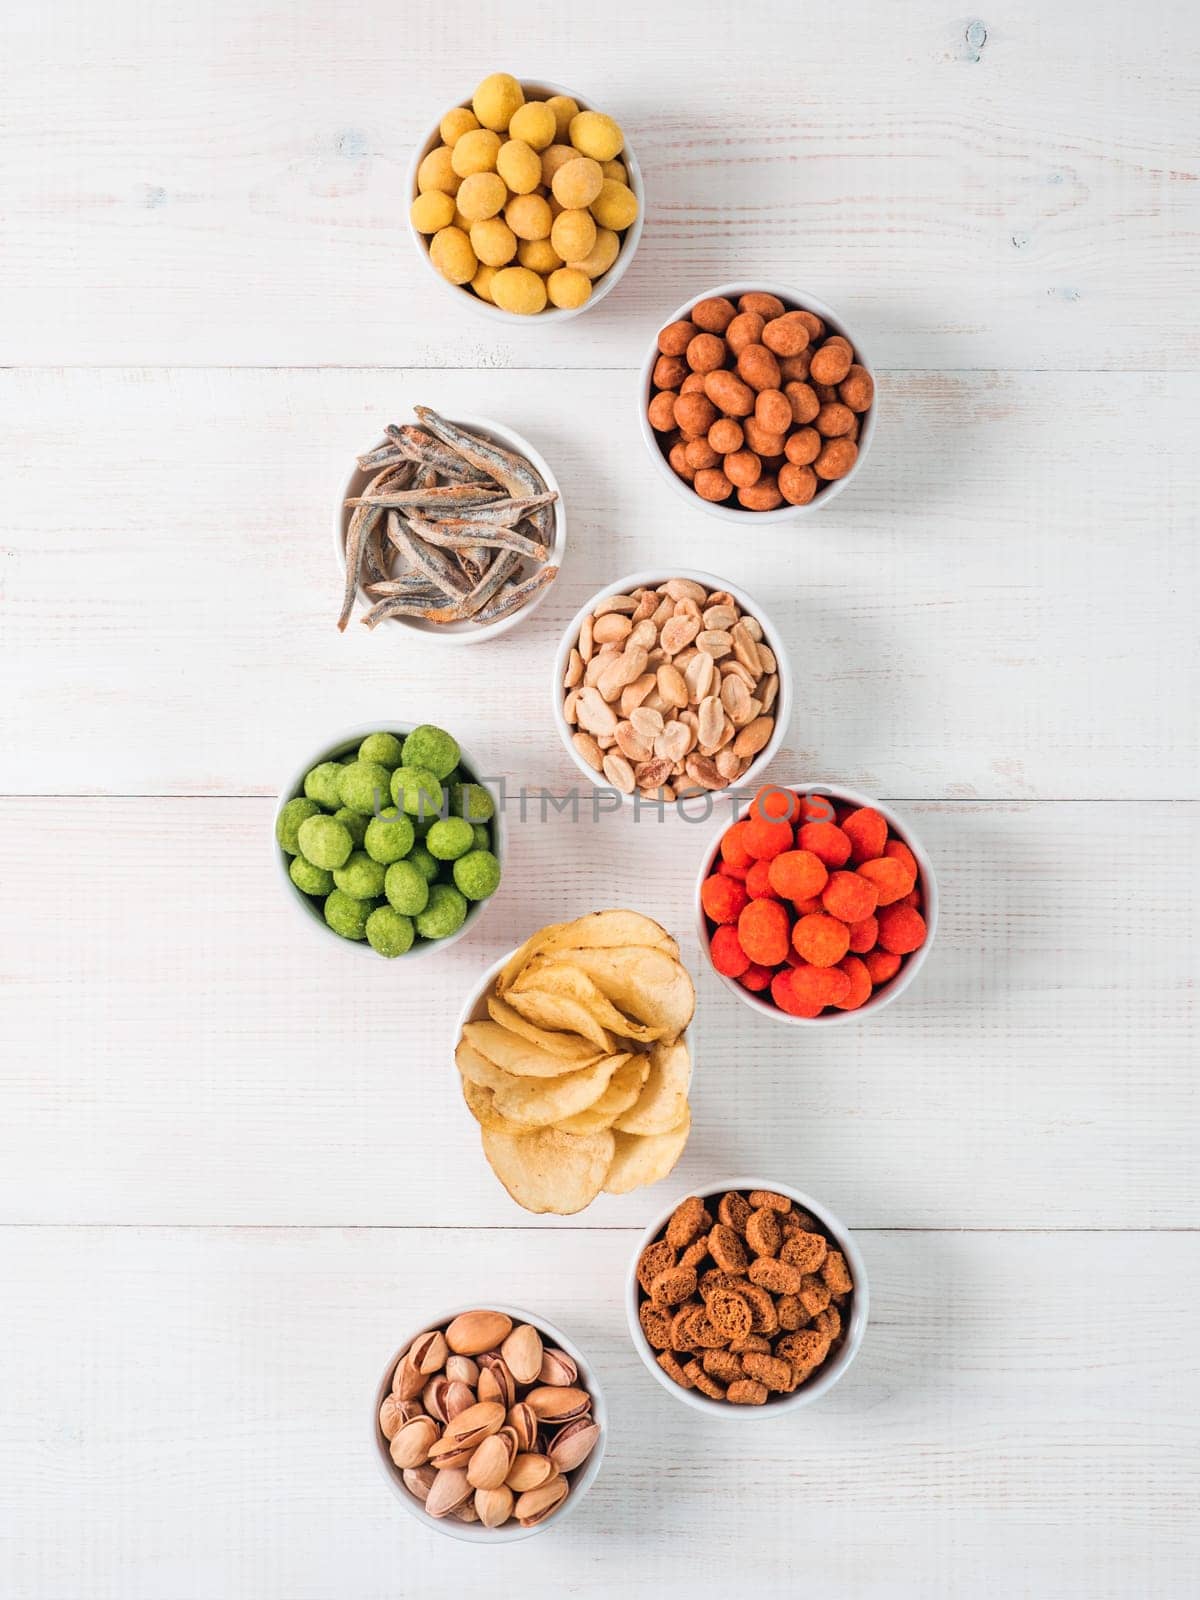 Assortment of different snack for beer,wine,party.Peanuts in coconut glaze,green vasabi,red spicy chilli,yellow cheese glaze and chips,pistachio,crackers,fish on white wooden table.Copyspace.Vertical.